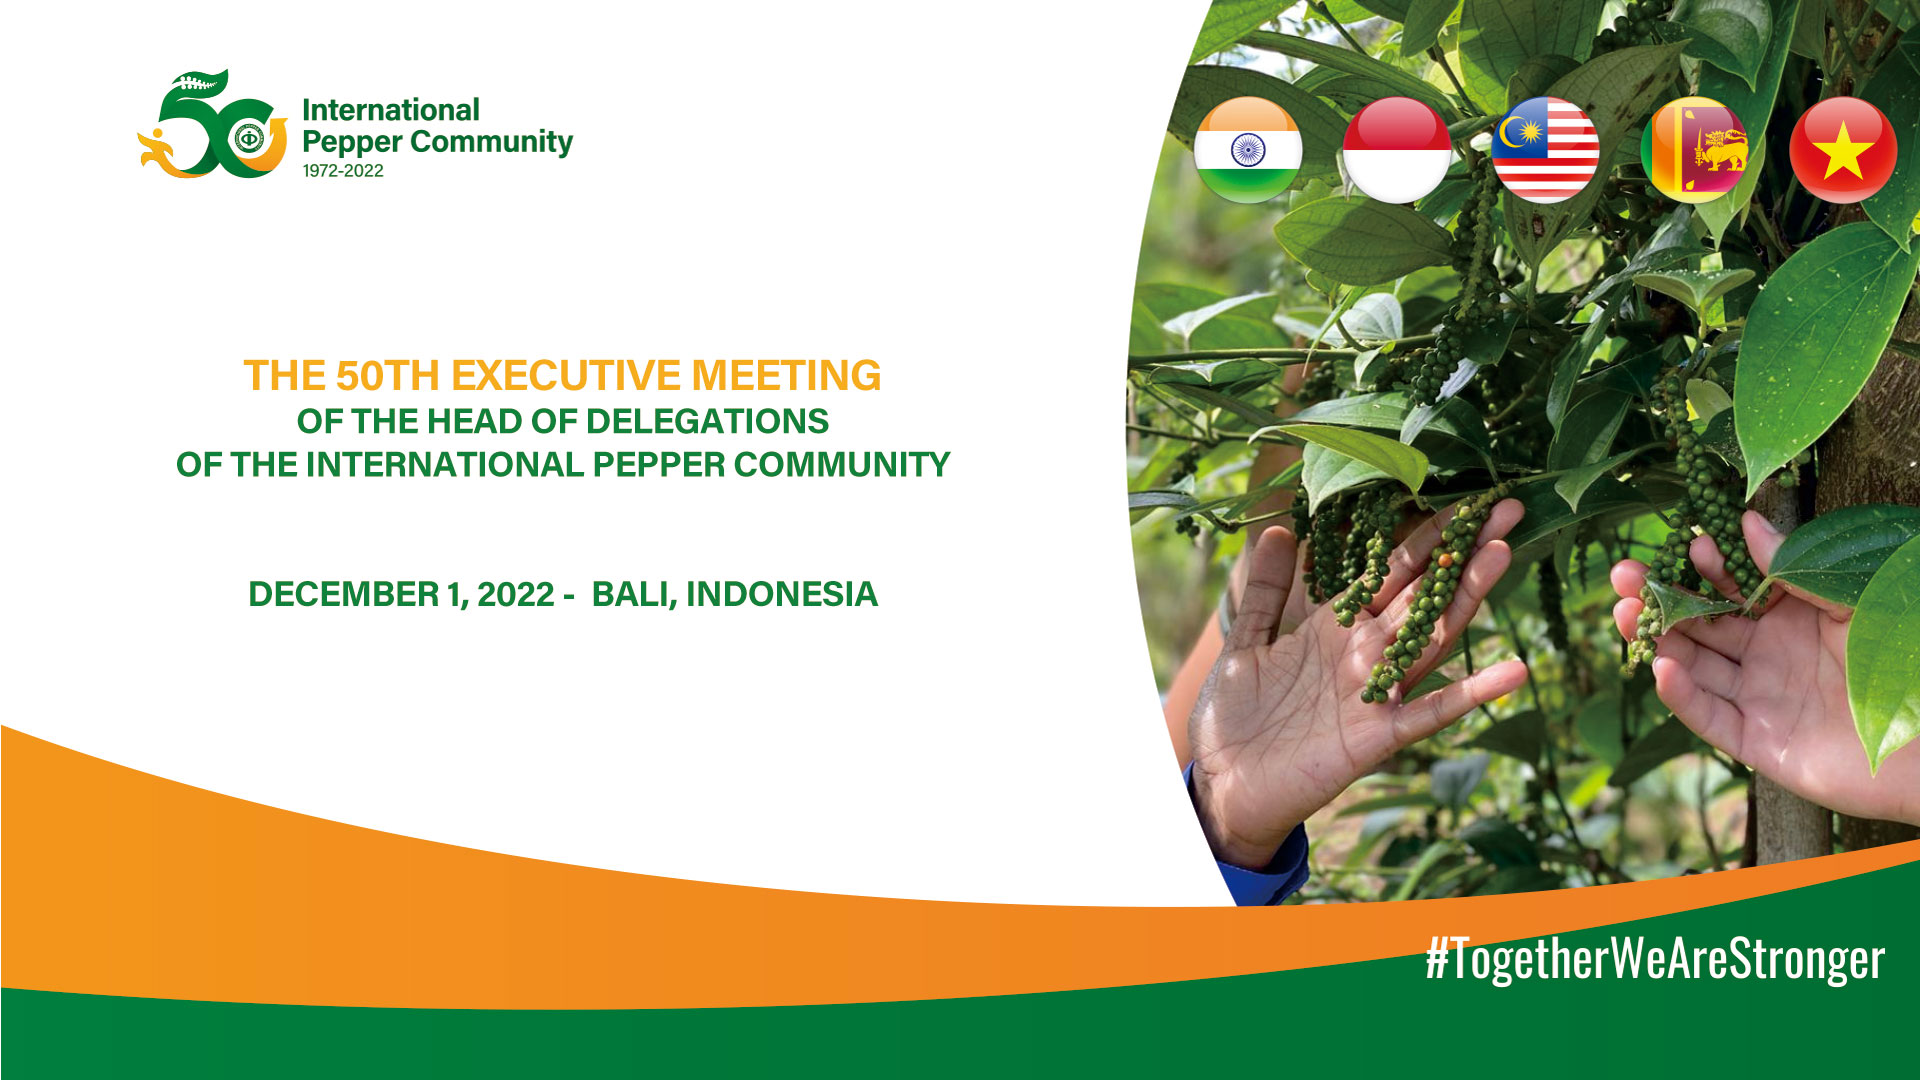 THE 50TH EXECUTIVE MEETING OF THE HEAD OF DELEGATIONS OF THE INTERNATIONAL PEPPER COMMUNITY